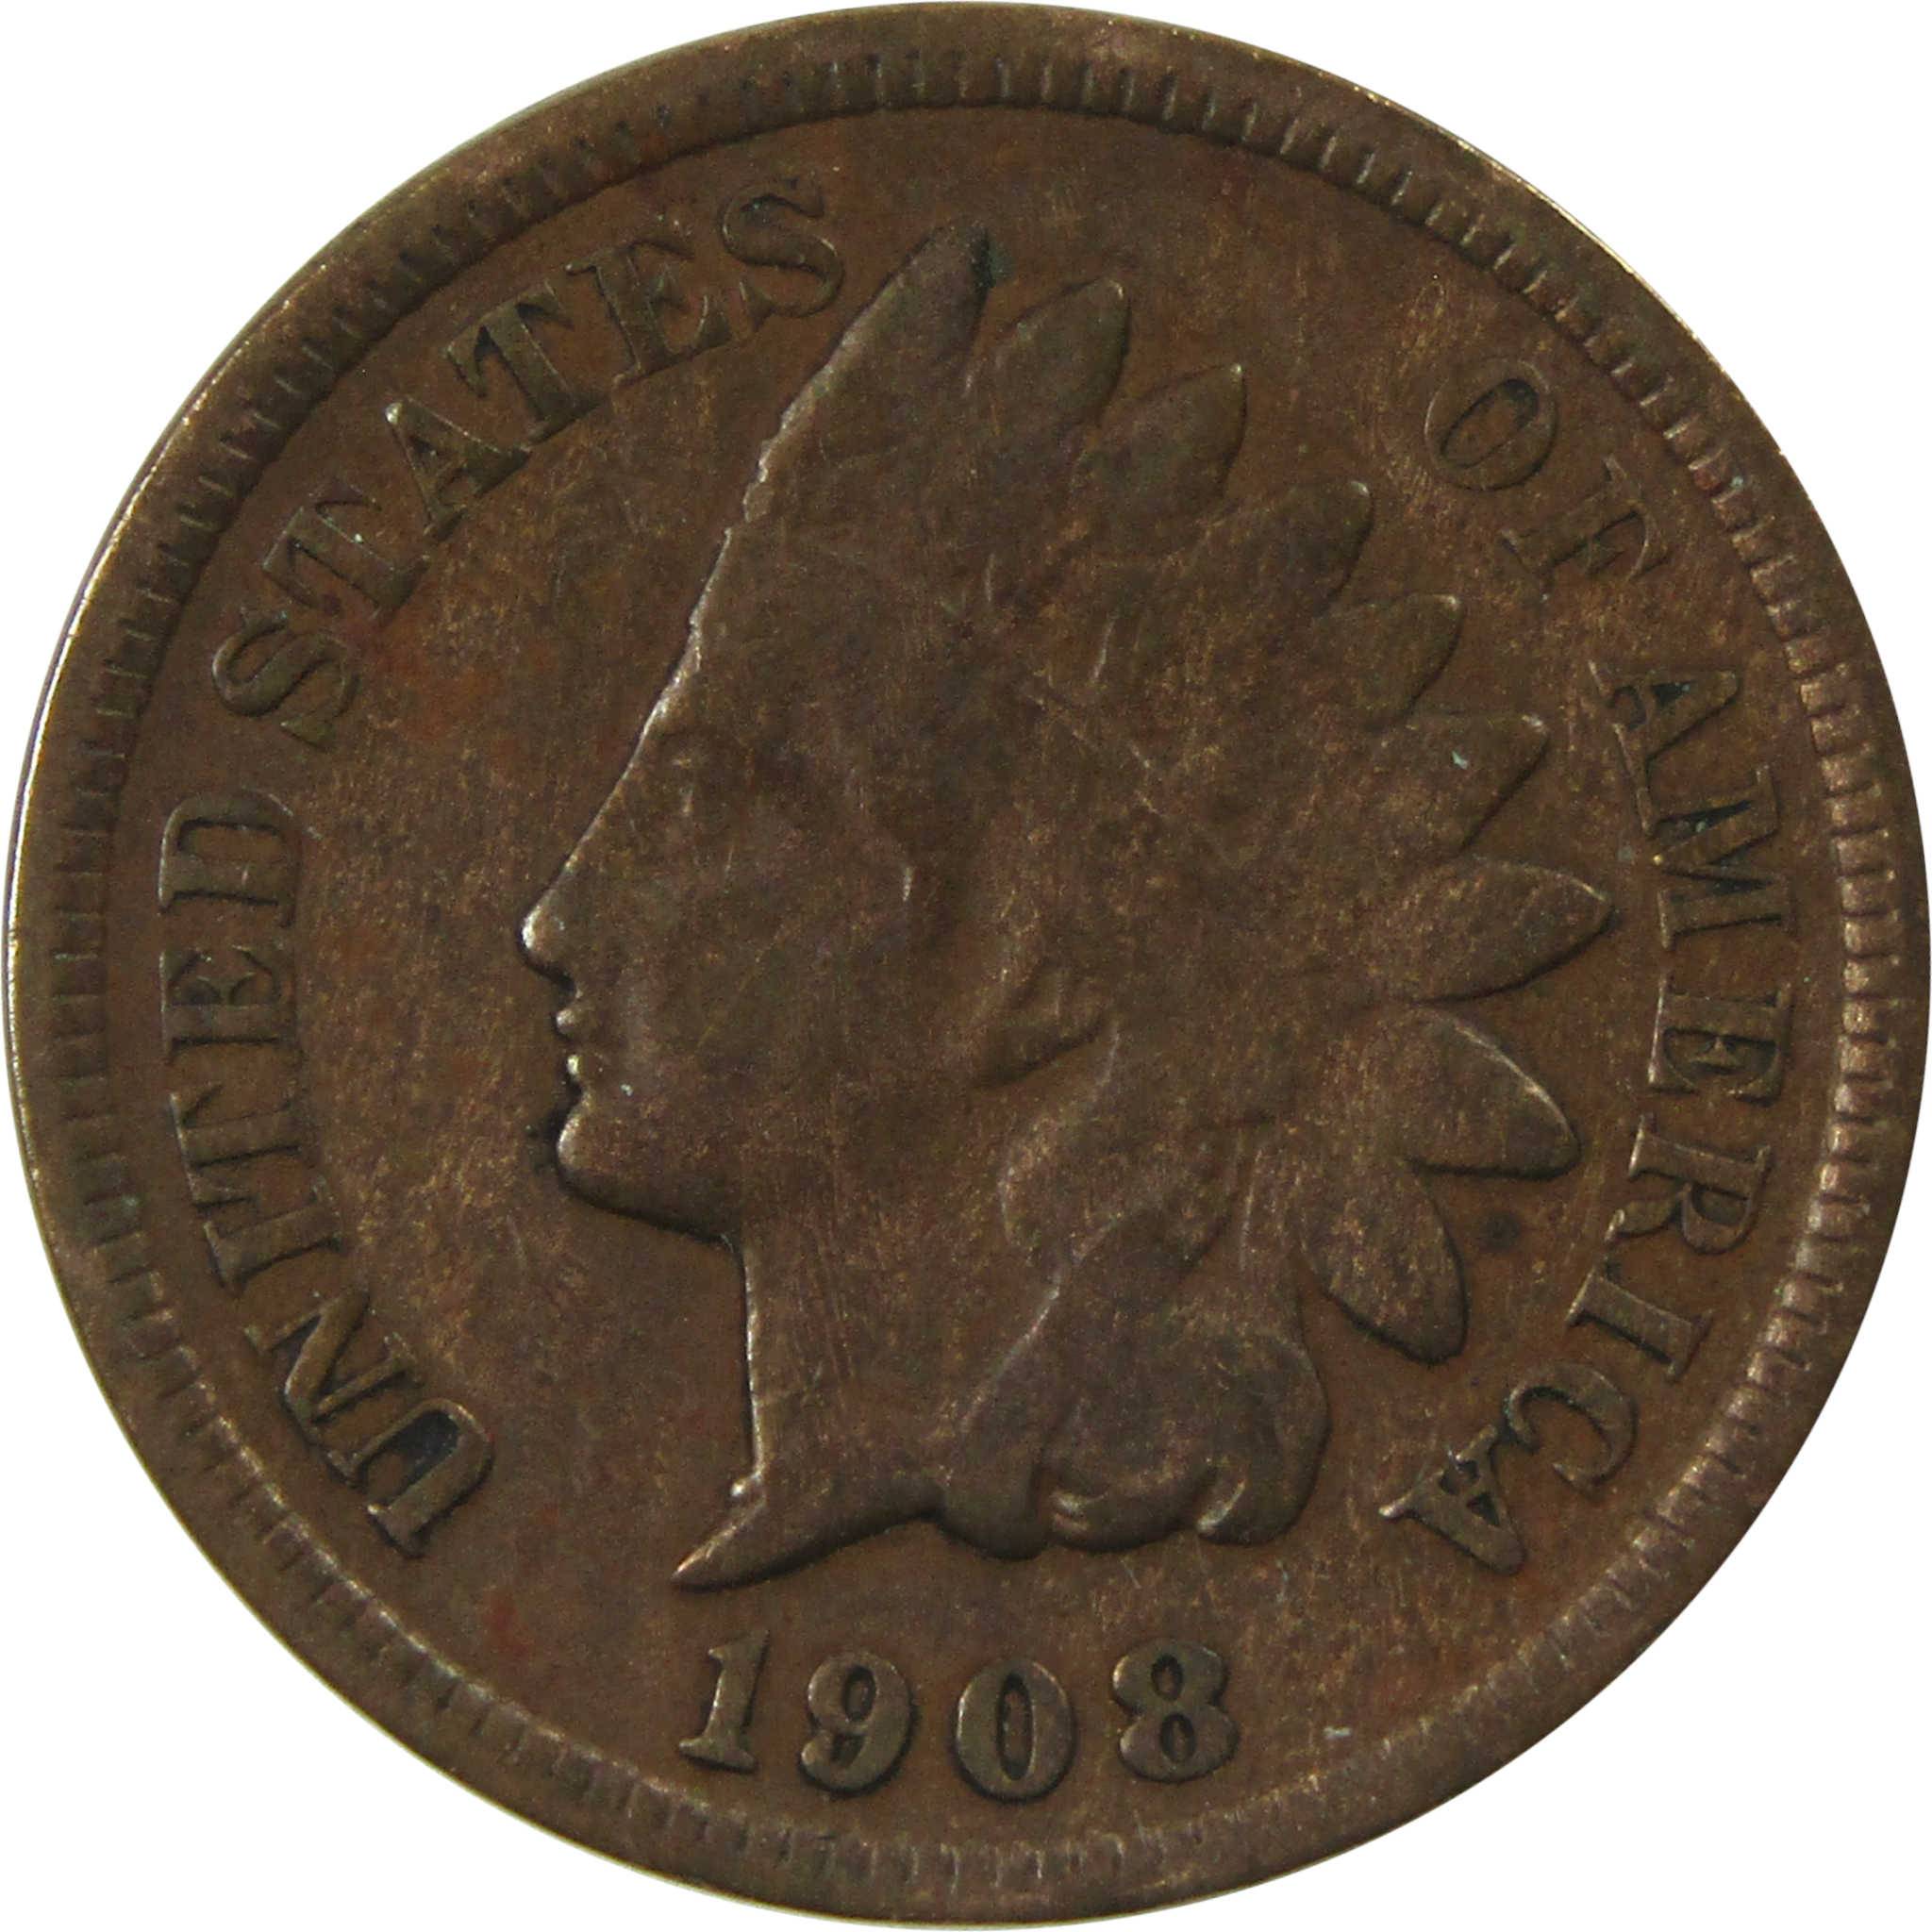 1908 S Indian Head Cent VG Very Good Details Penny 1c Coin SKU:I13655